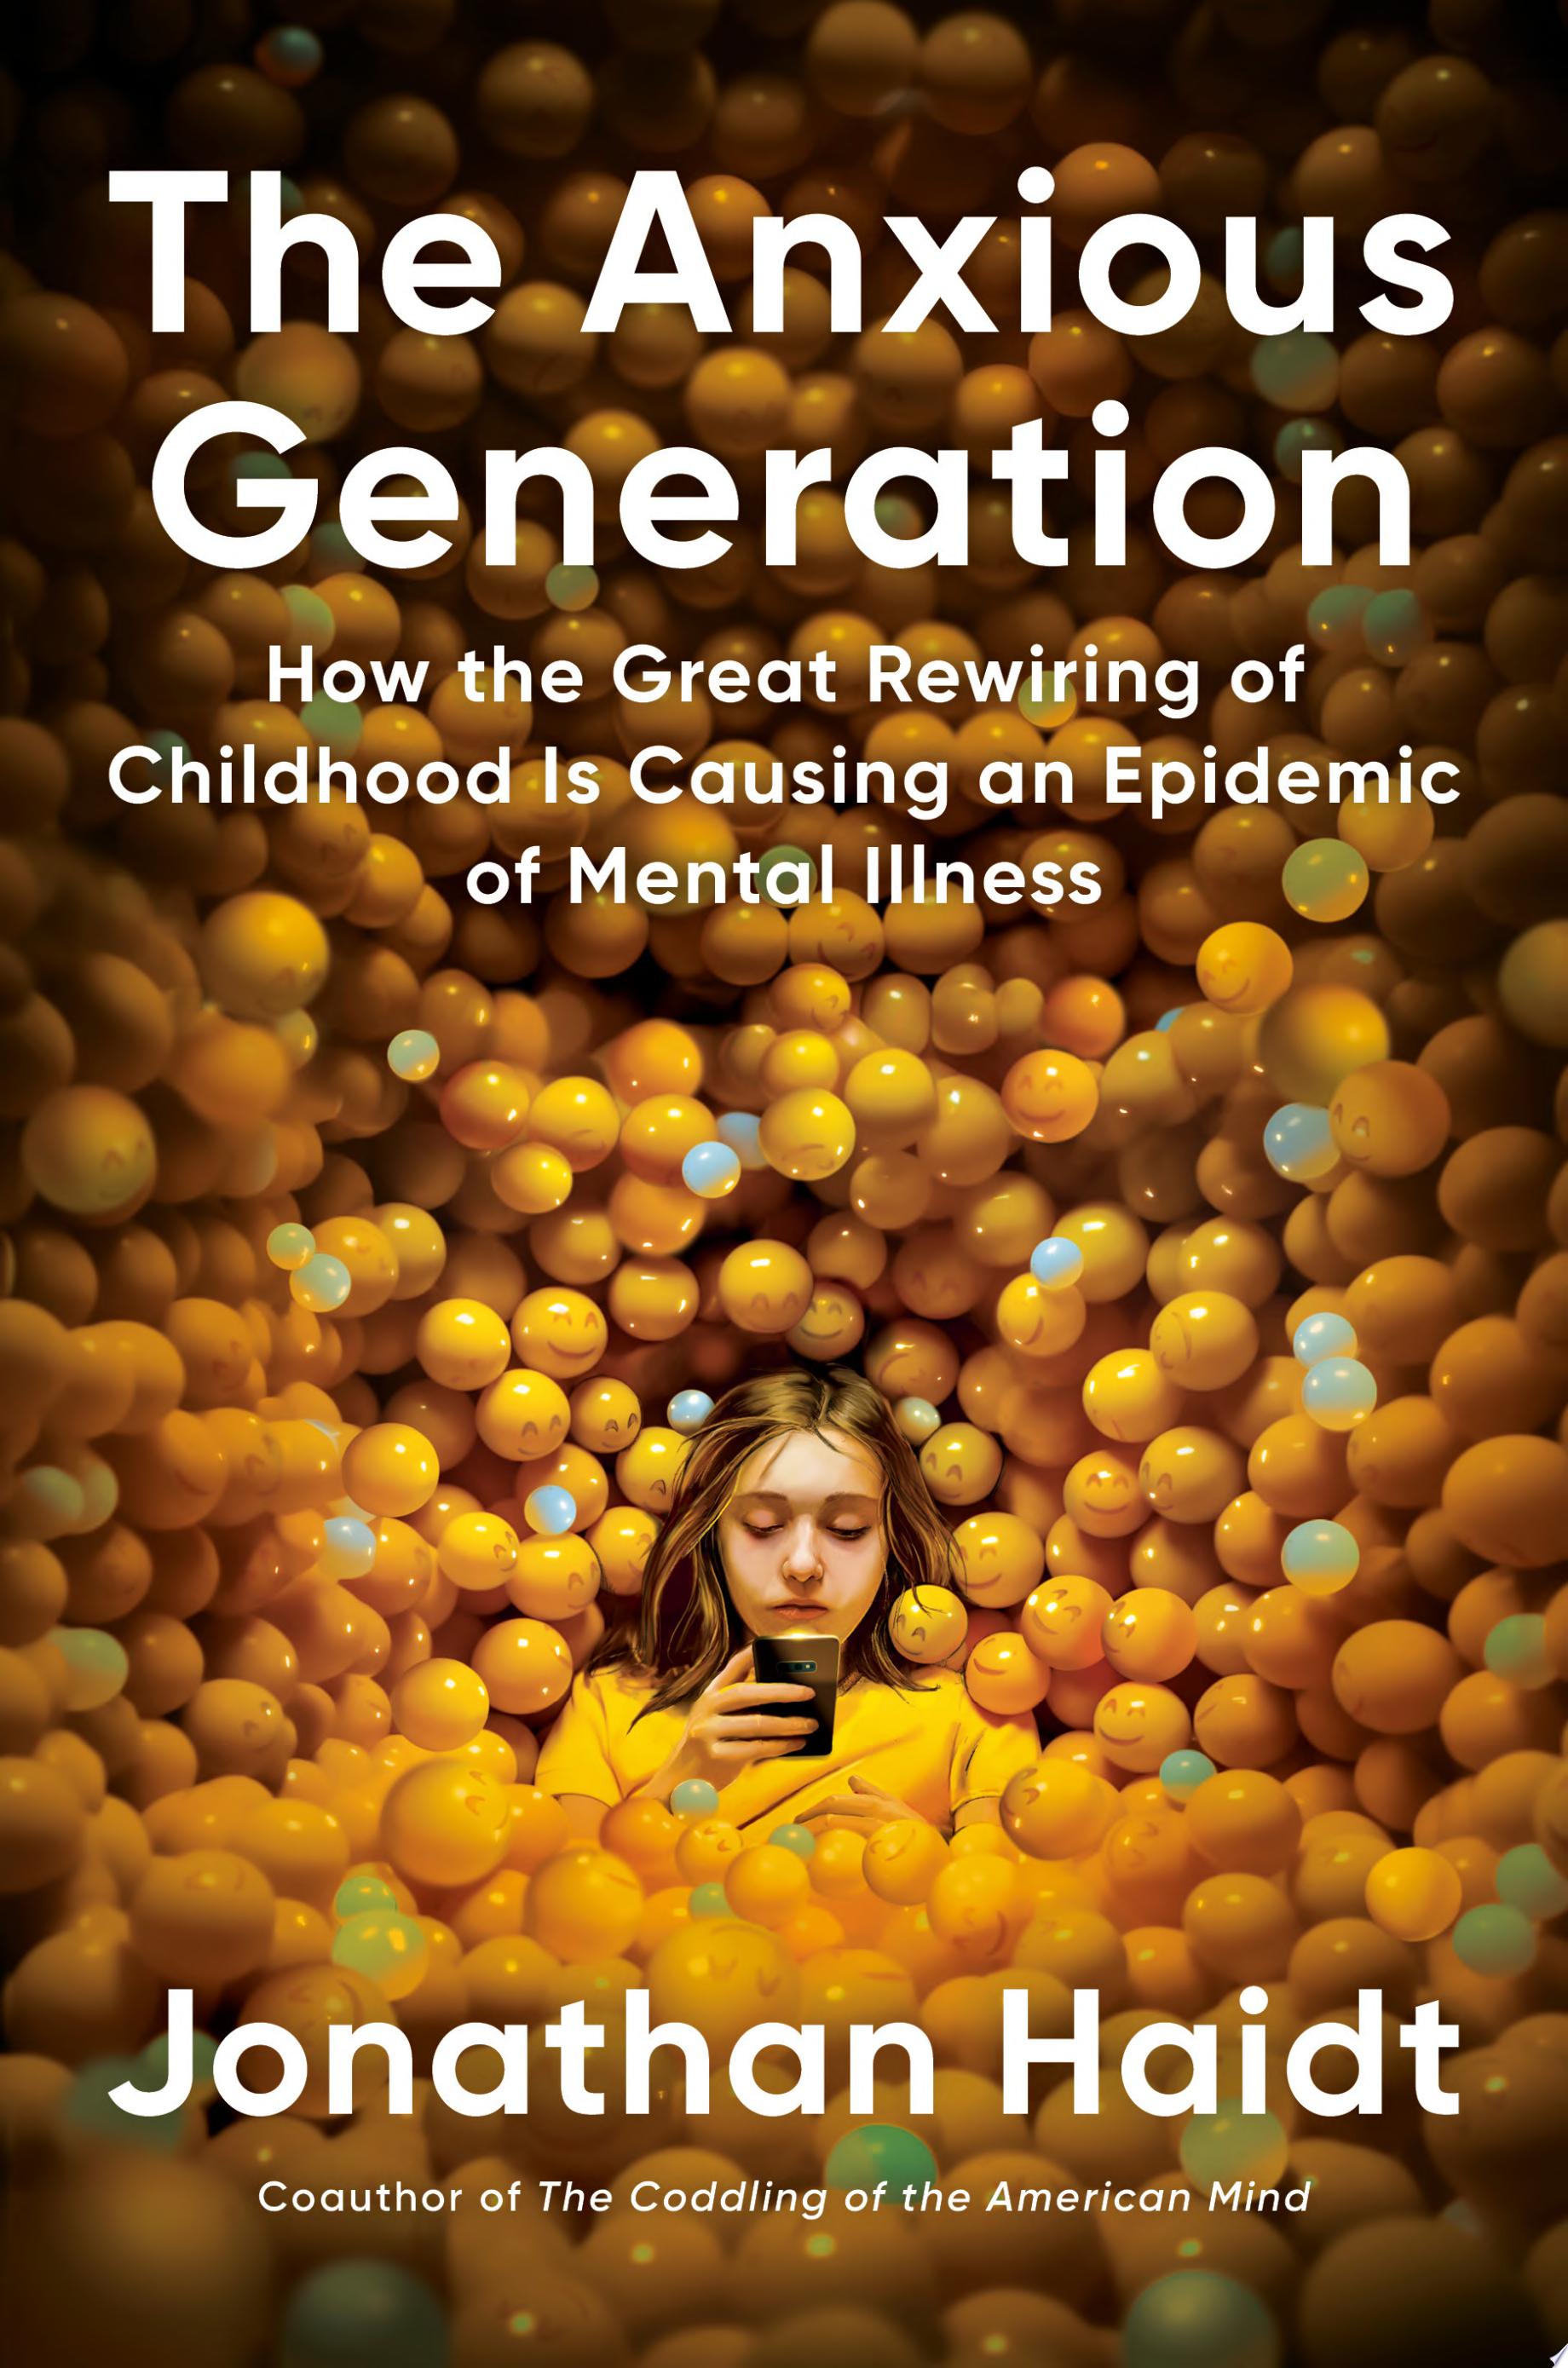 Image for "The Anxious Generation"